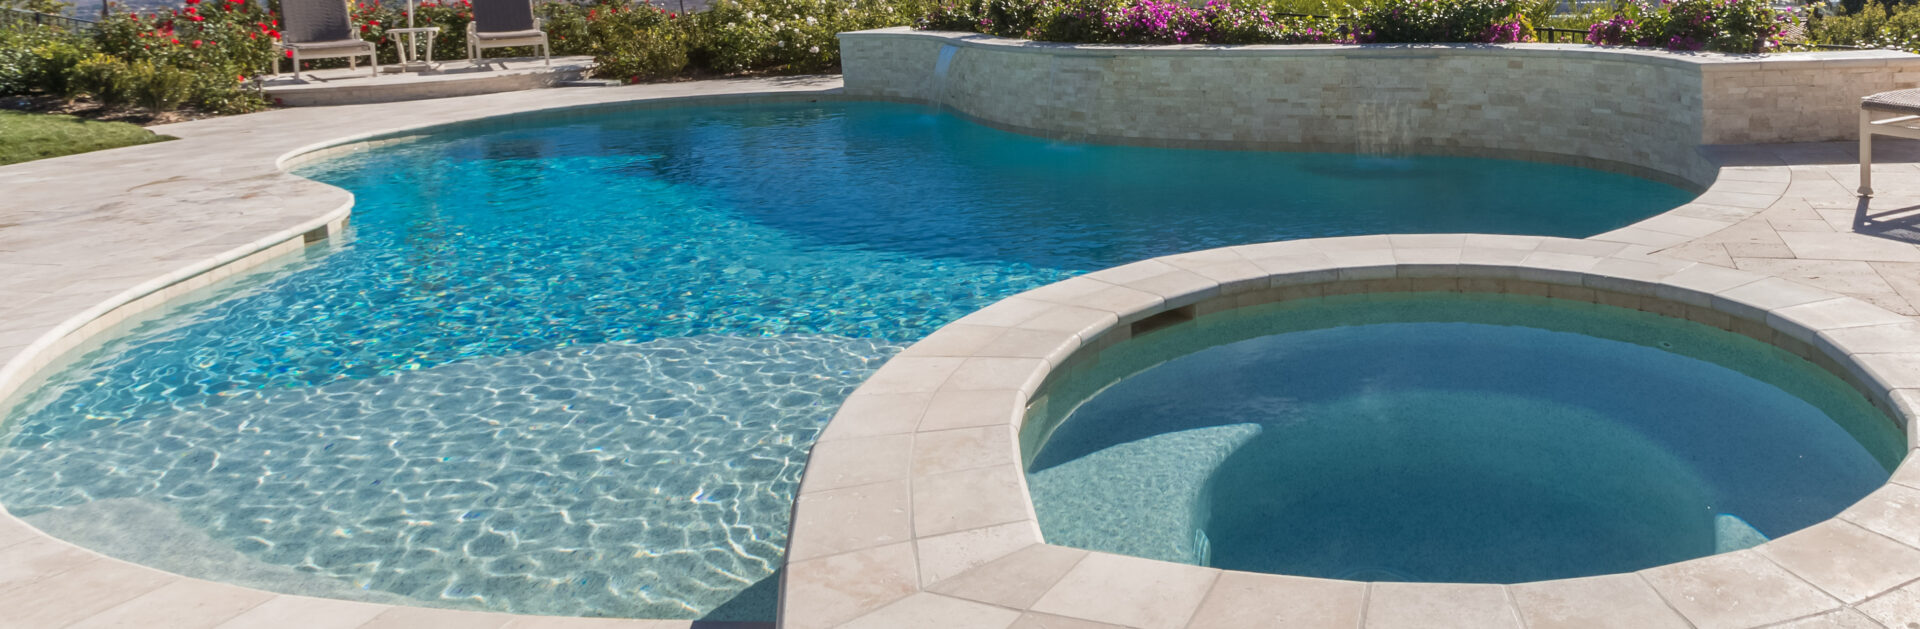 Alan Smith Pool Plastering & Remodeling|Pearl With<br/>Jewels for Pools